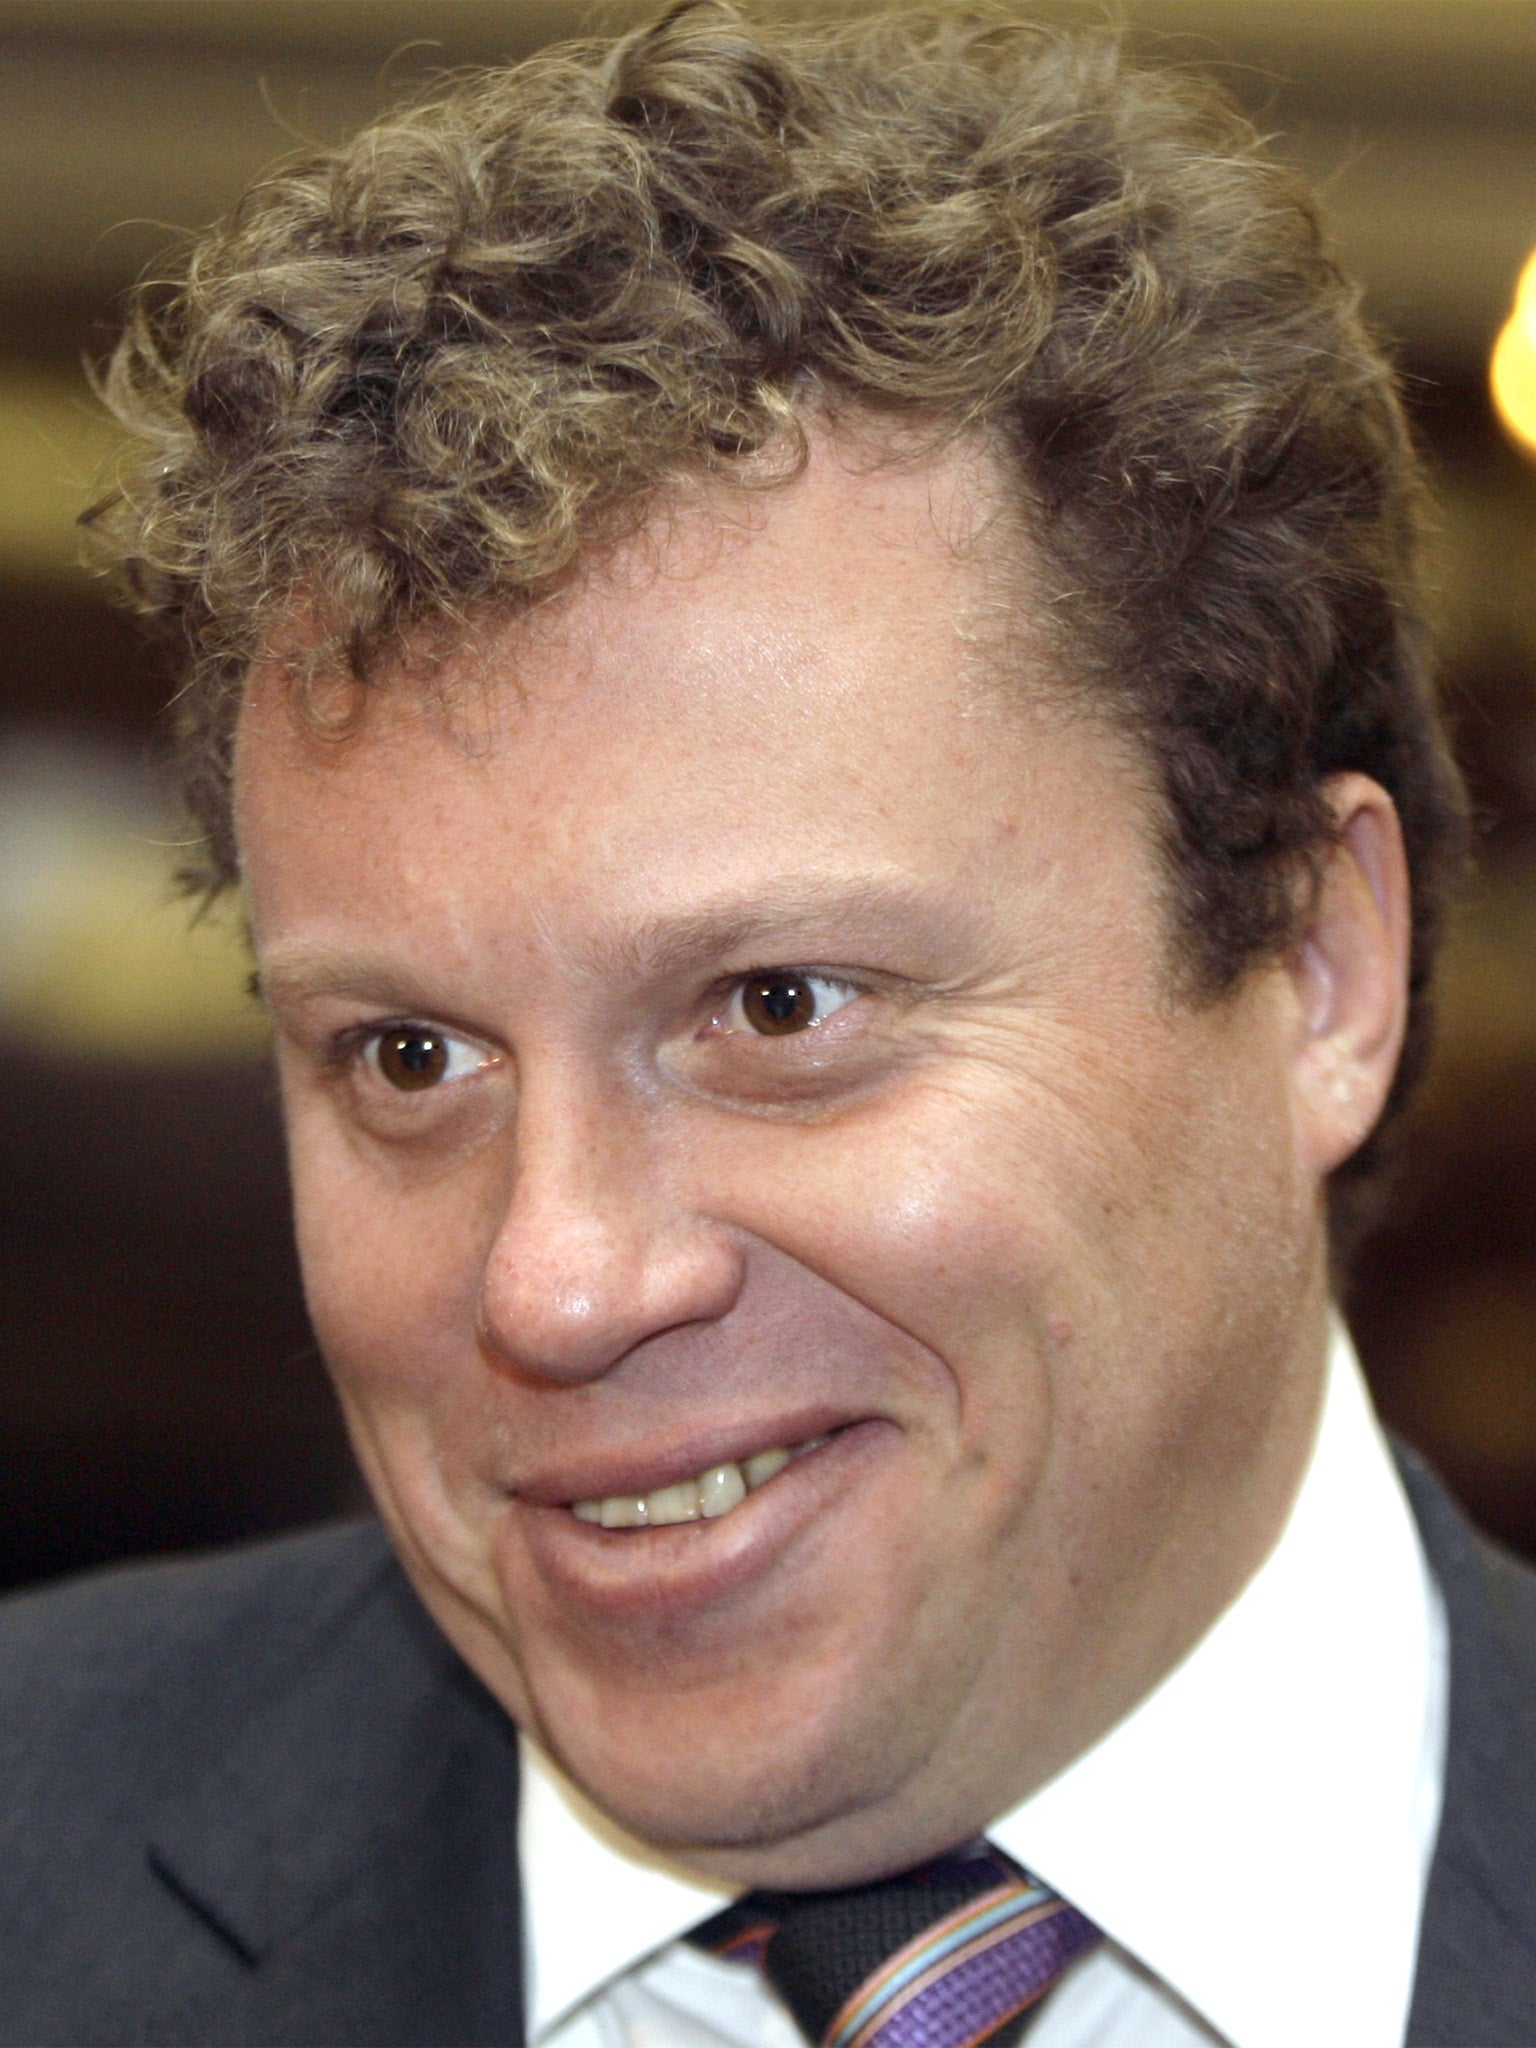 Sergei Polonsky's construction businesses collapsed in 2008